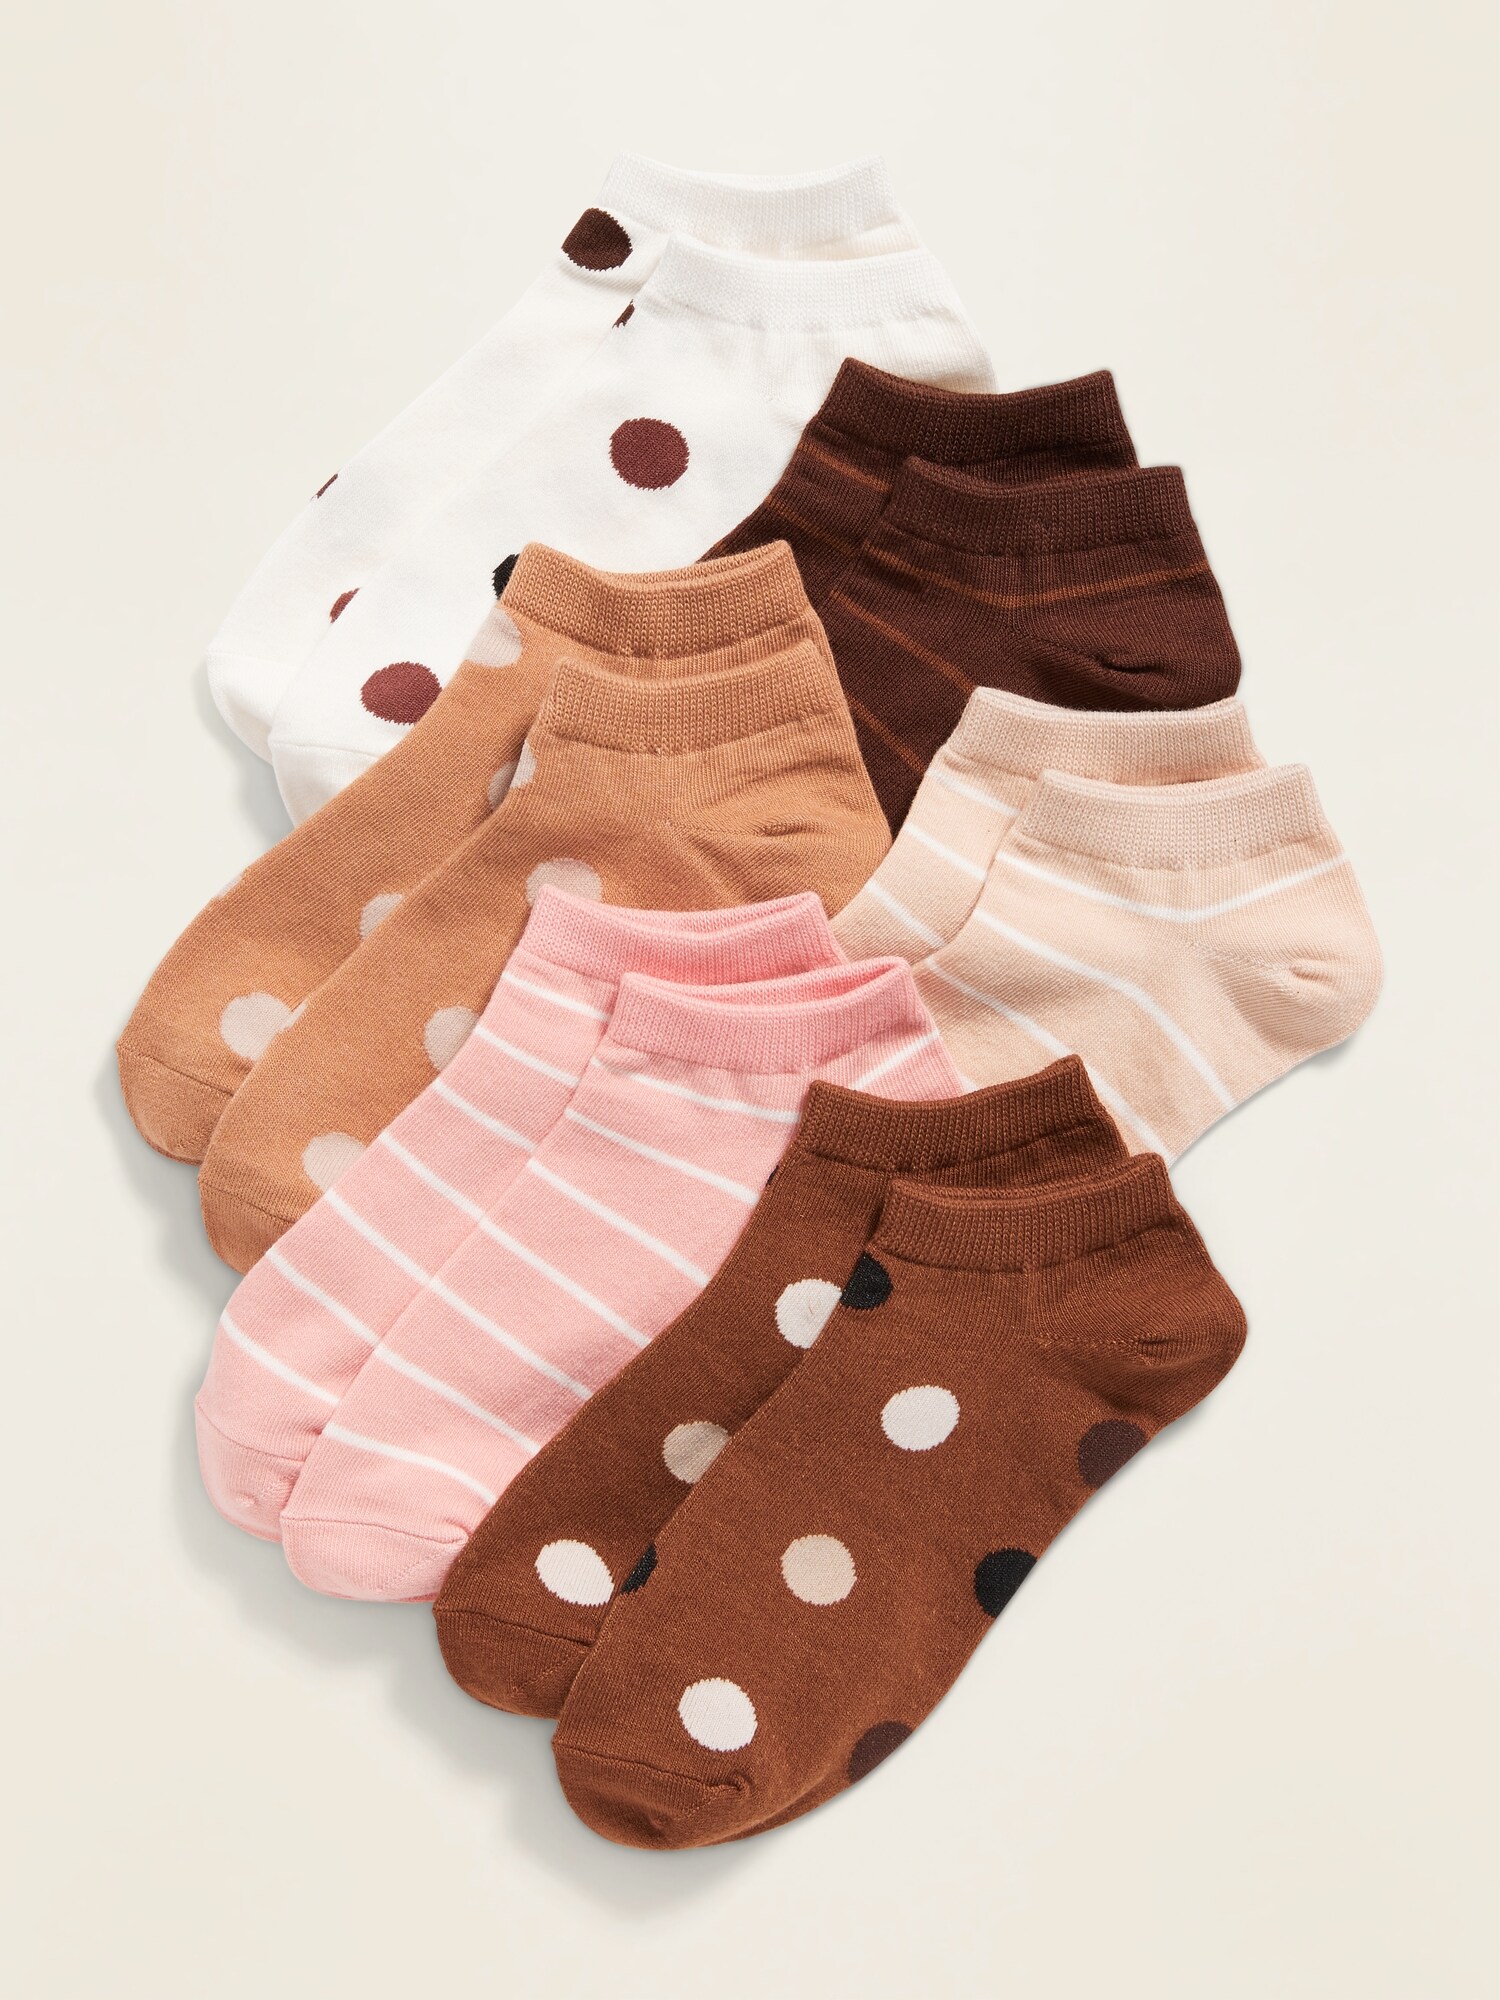 *Today Only Deal* Fashion Ankle Socks 6-Pack for Girls